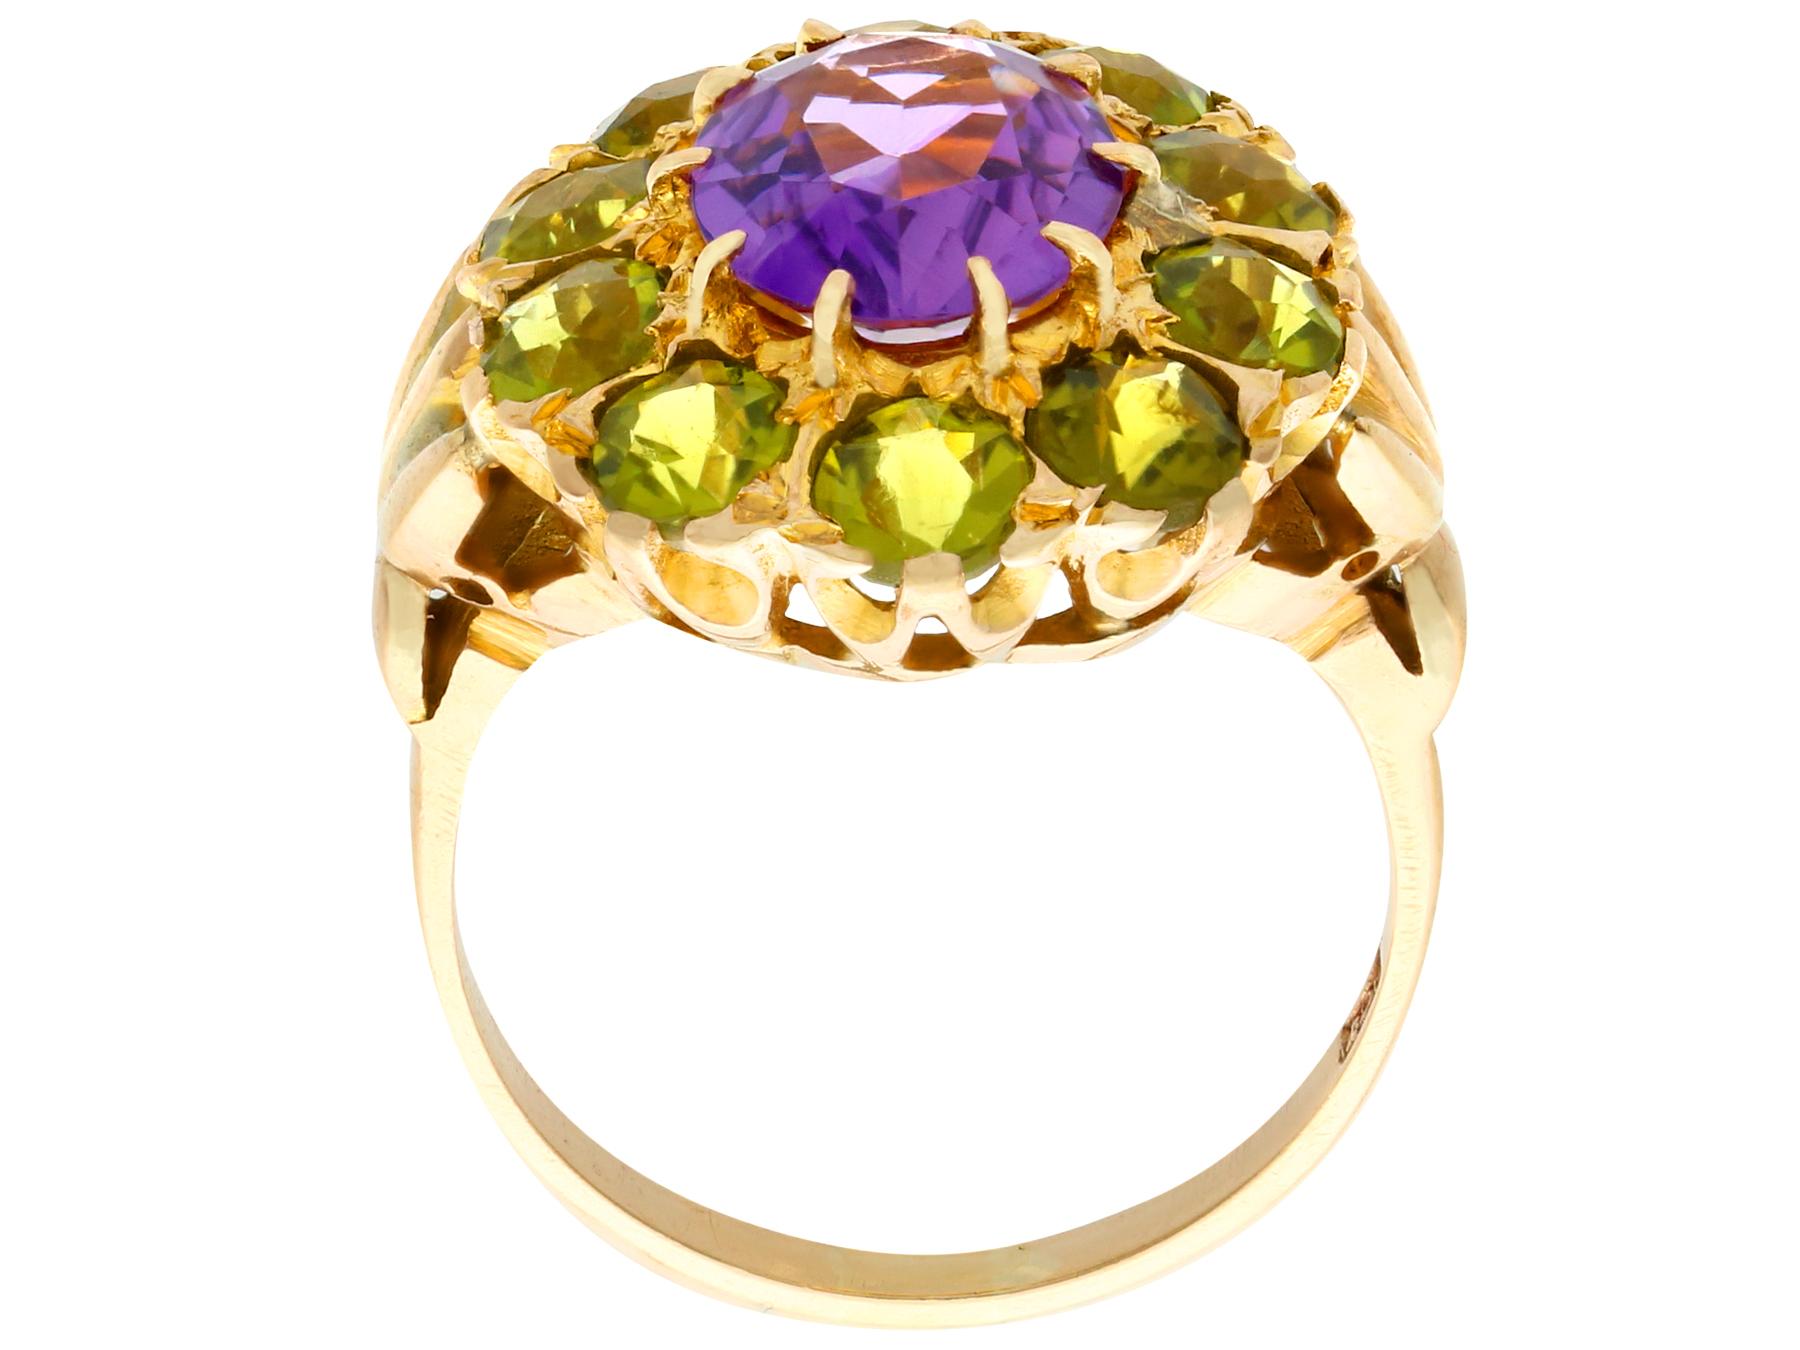 2.41 Carat Amethyst and 2.56 Carat Peridot Yellow Gold Cocktail Ring Circa 1890 In Excellent Condition For Sale In Jesmond, Newcastle Upon Tyne